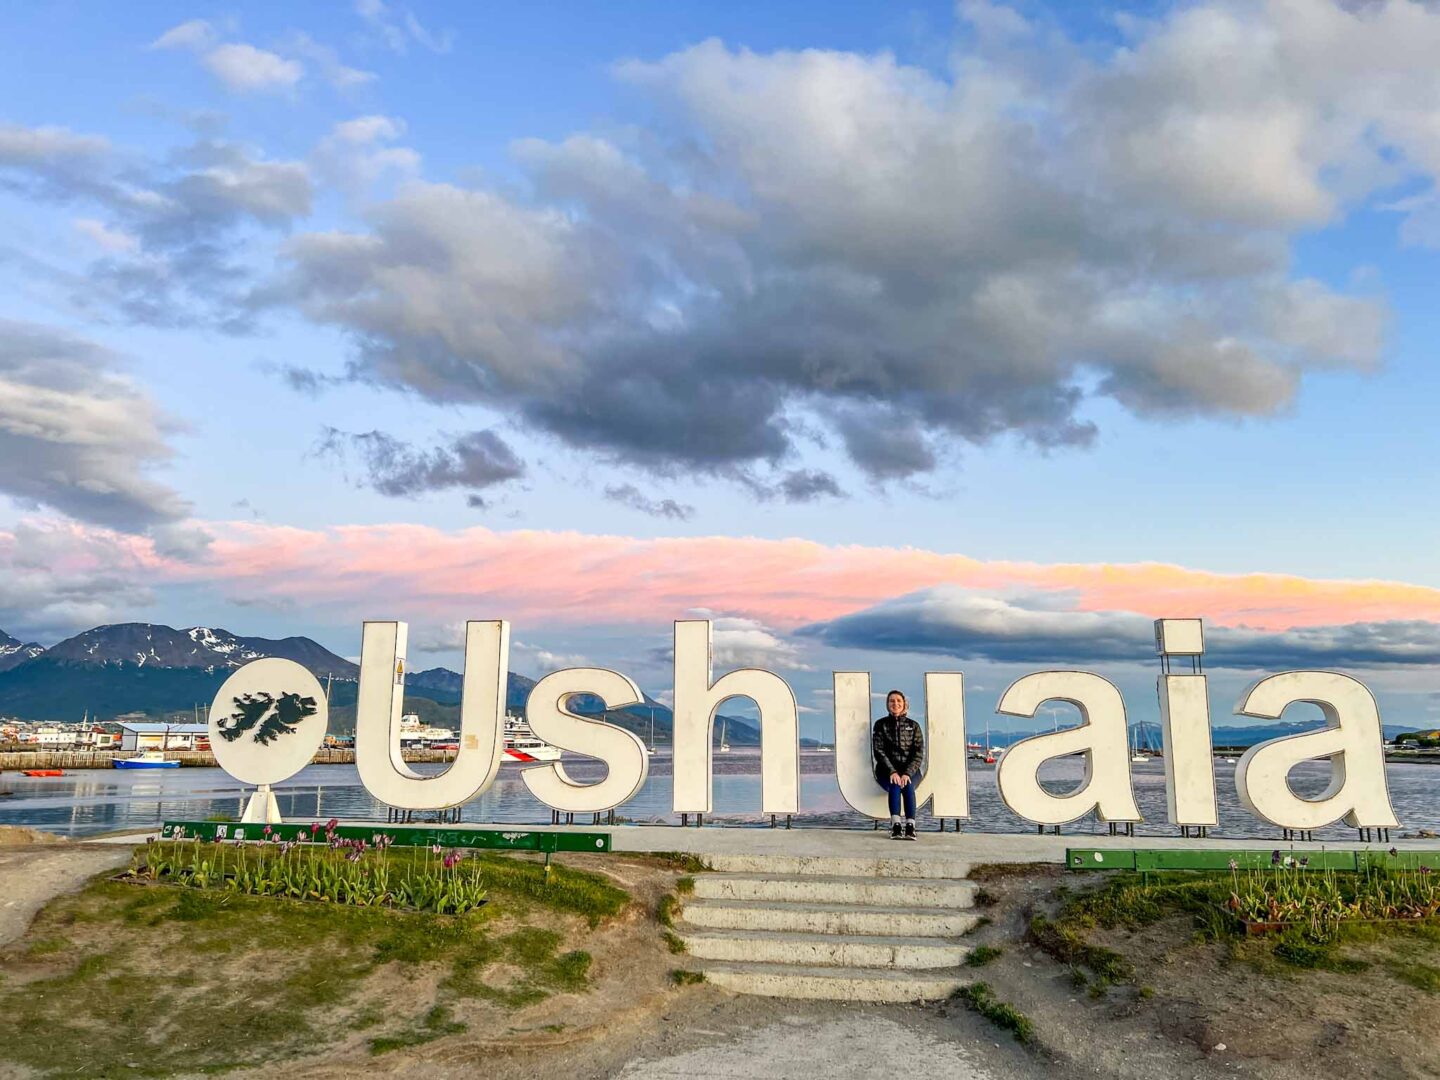 things to do in Ushuaia, Ellie at the Ushuaia sign at sunset